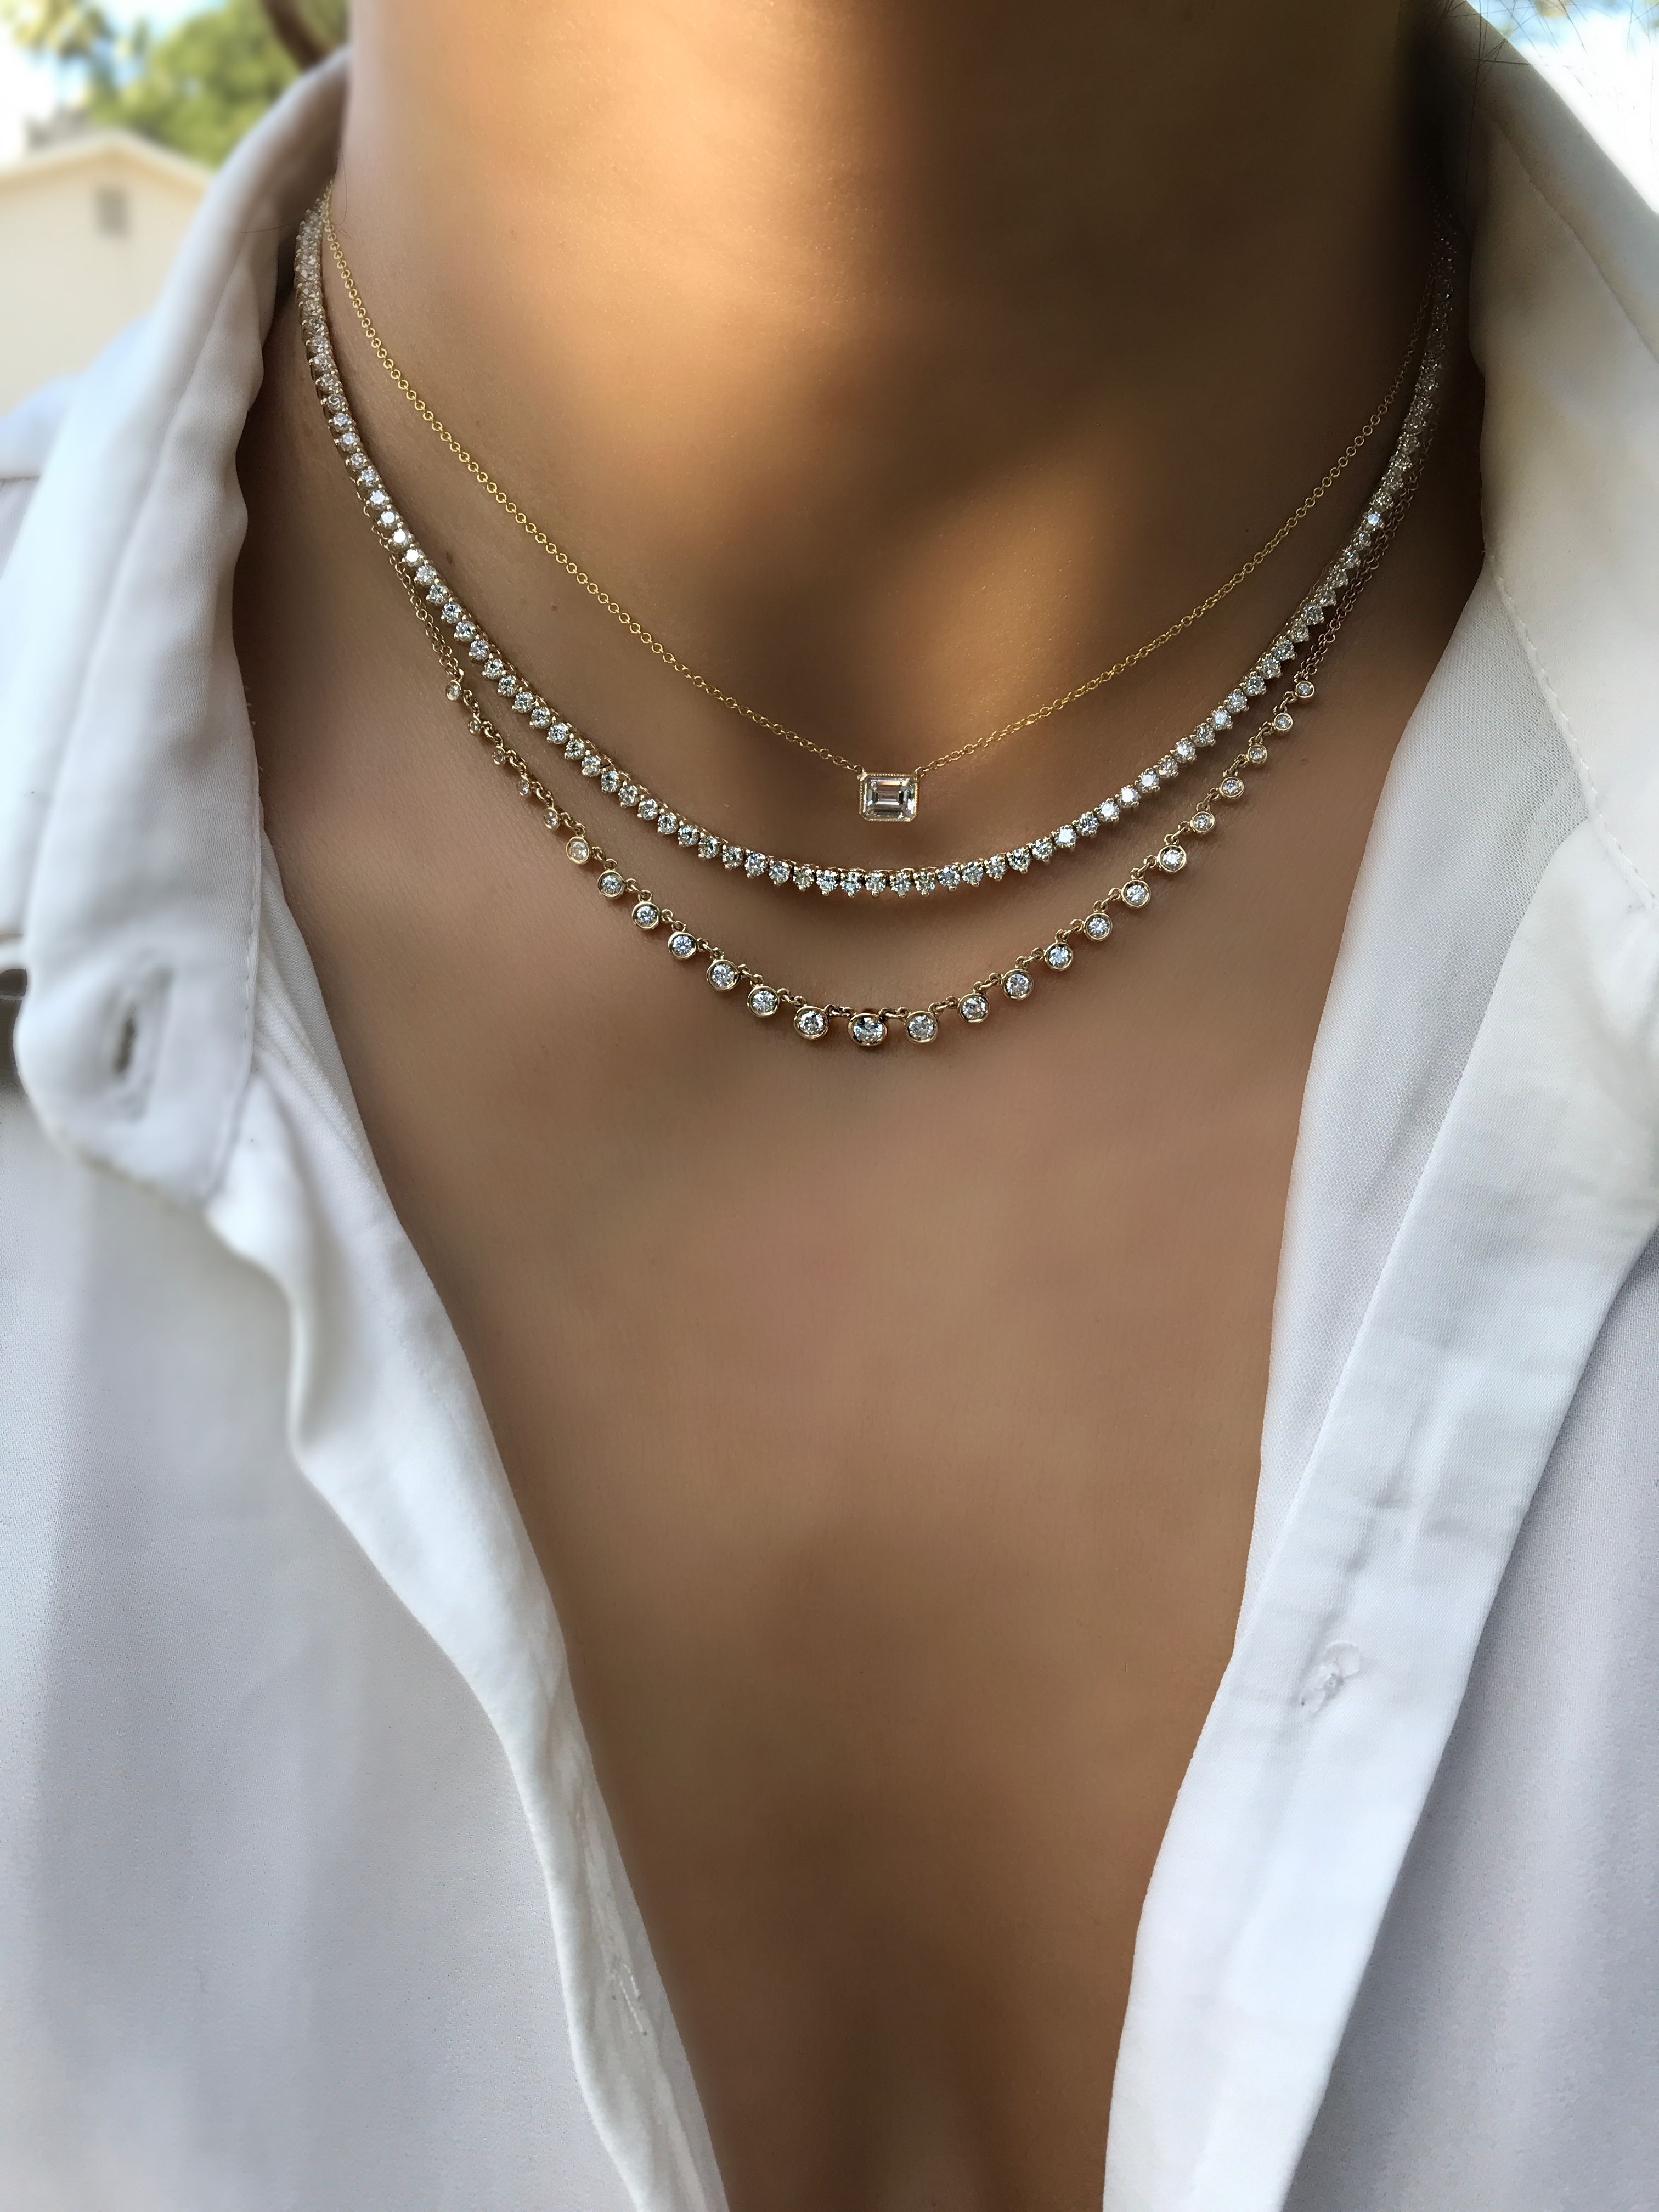 Aiko Diamond Tennis Choker Necklace | Baubbles In 2019 Throughout Most Up To Date Round Brilliant Diamond Lariat Necklaces (View 15 of 25)